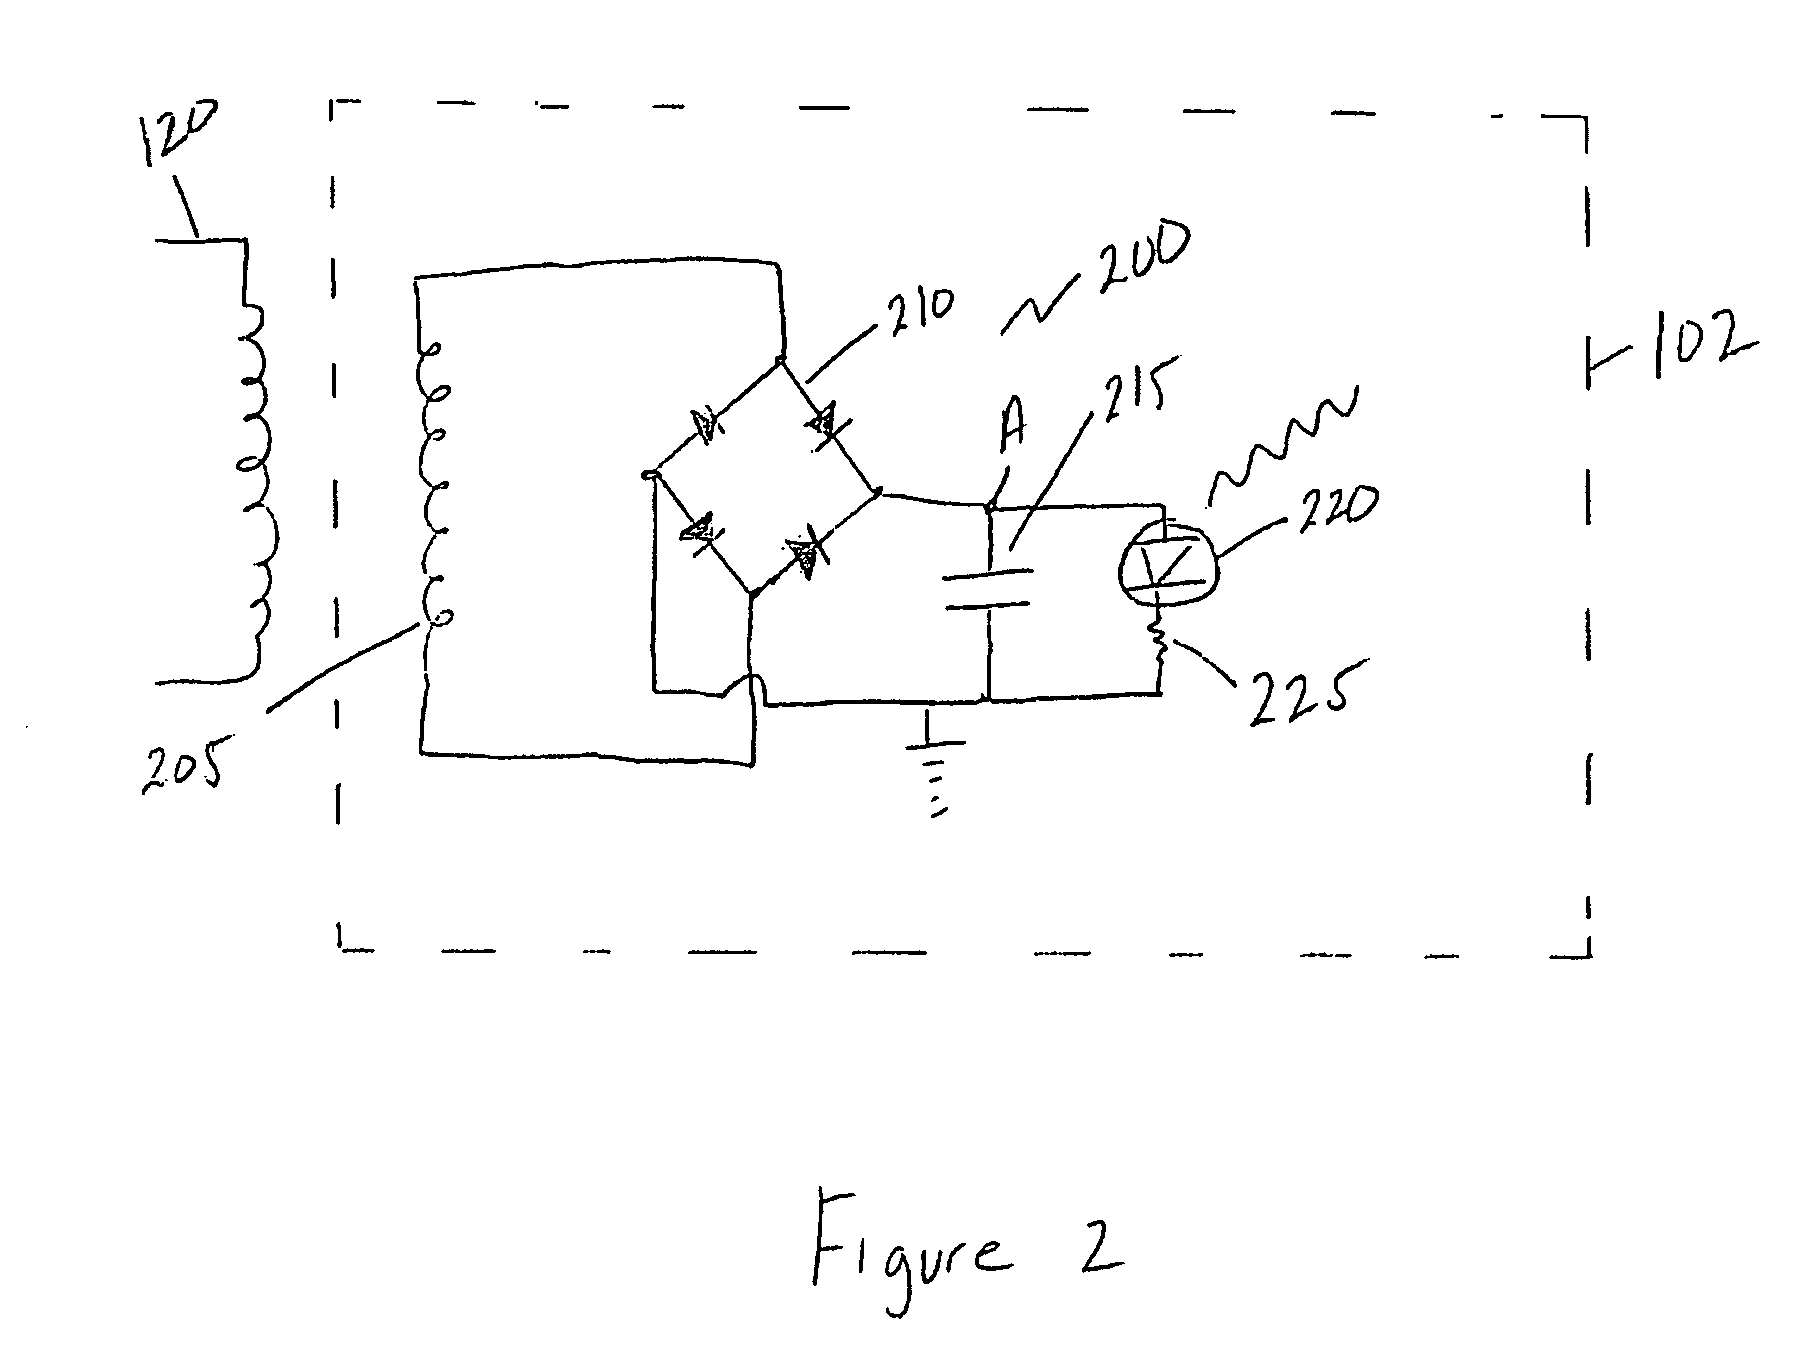 System and method for providing inductive power to improve product marking and advertising